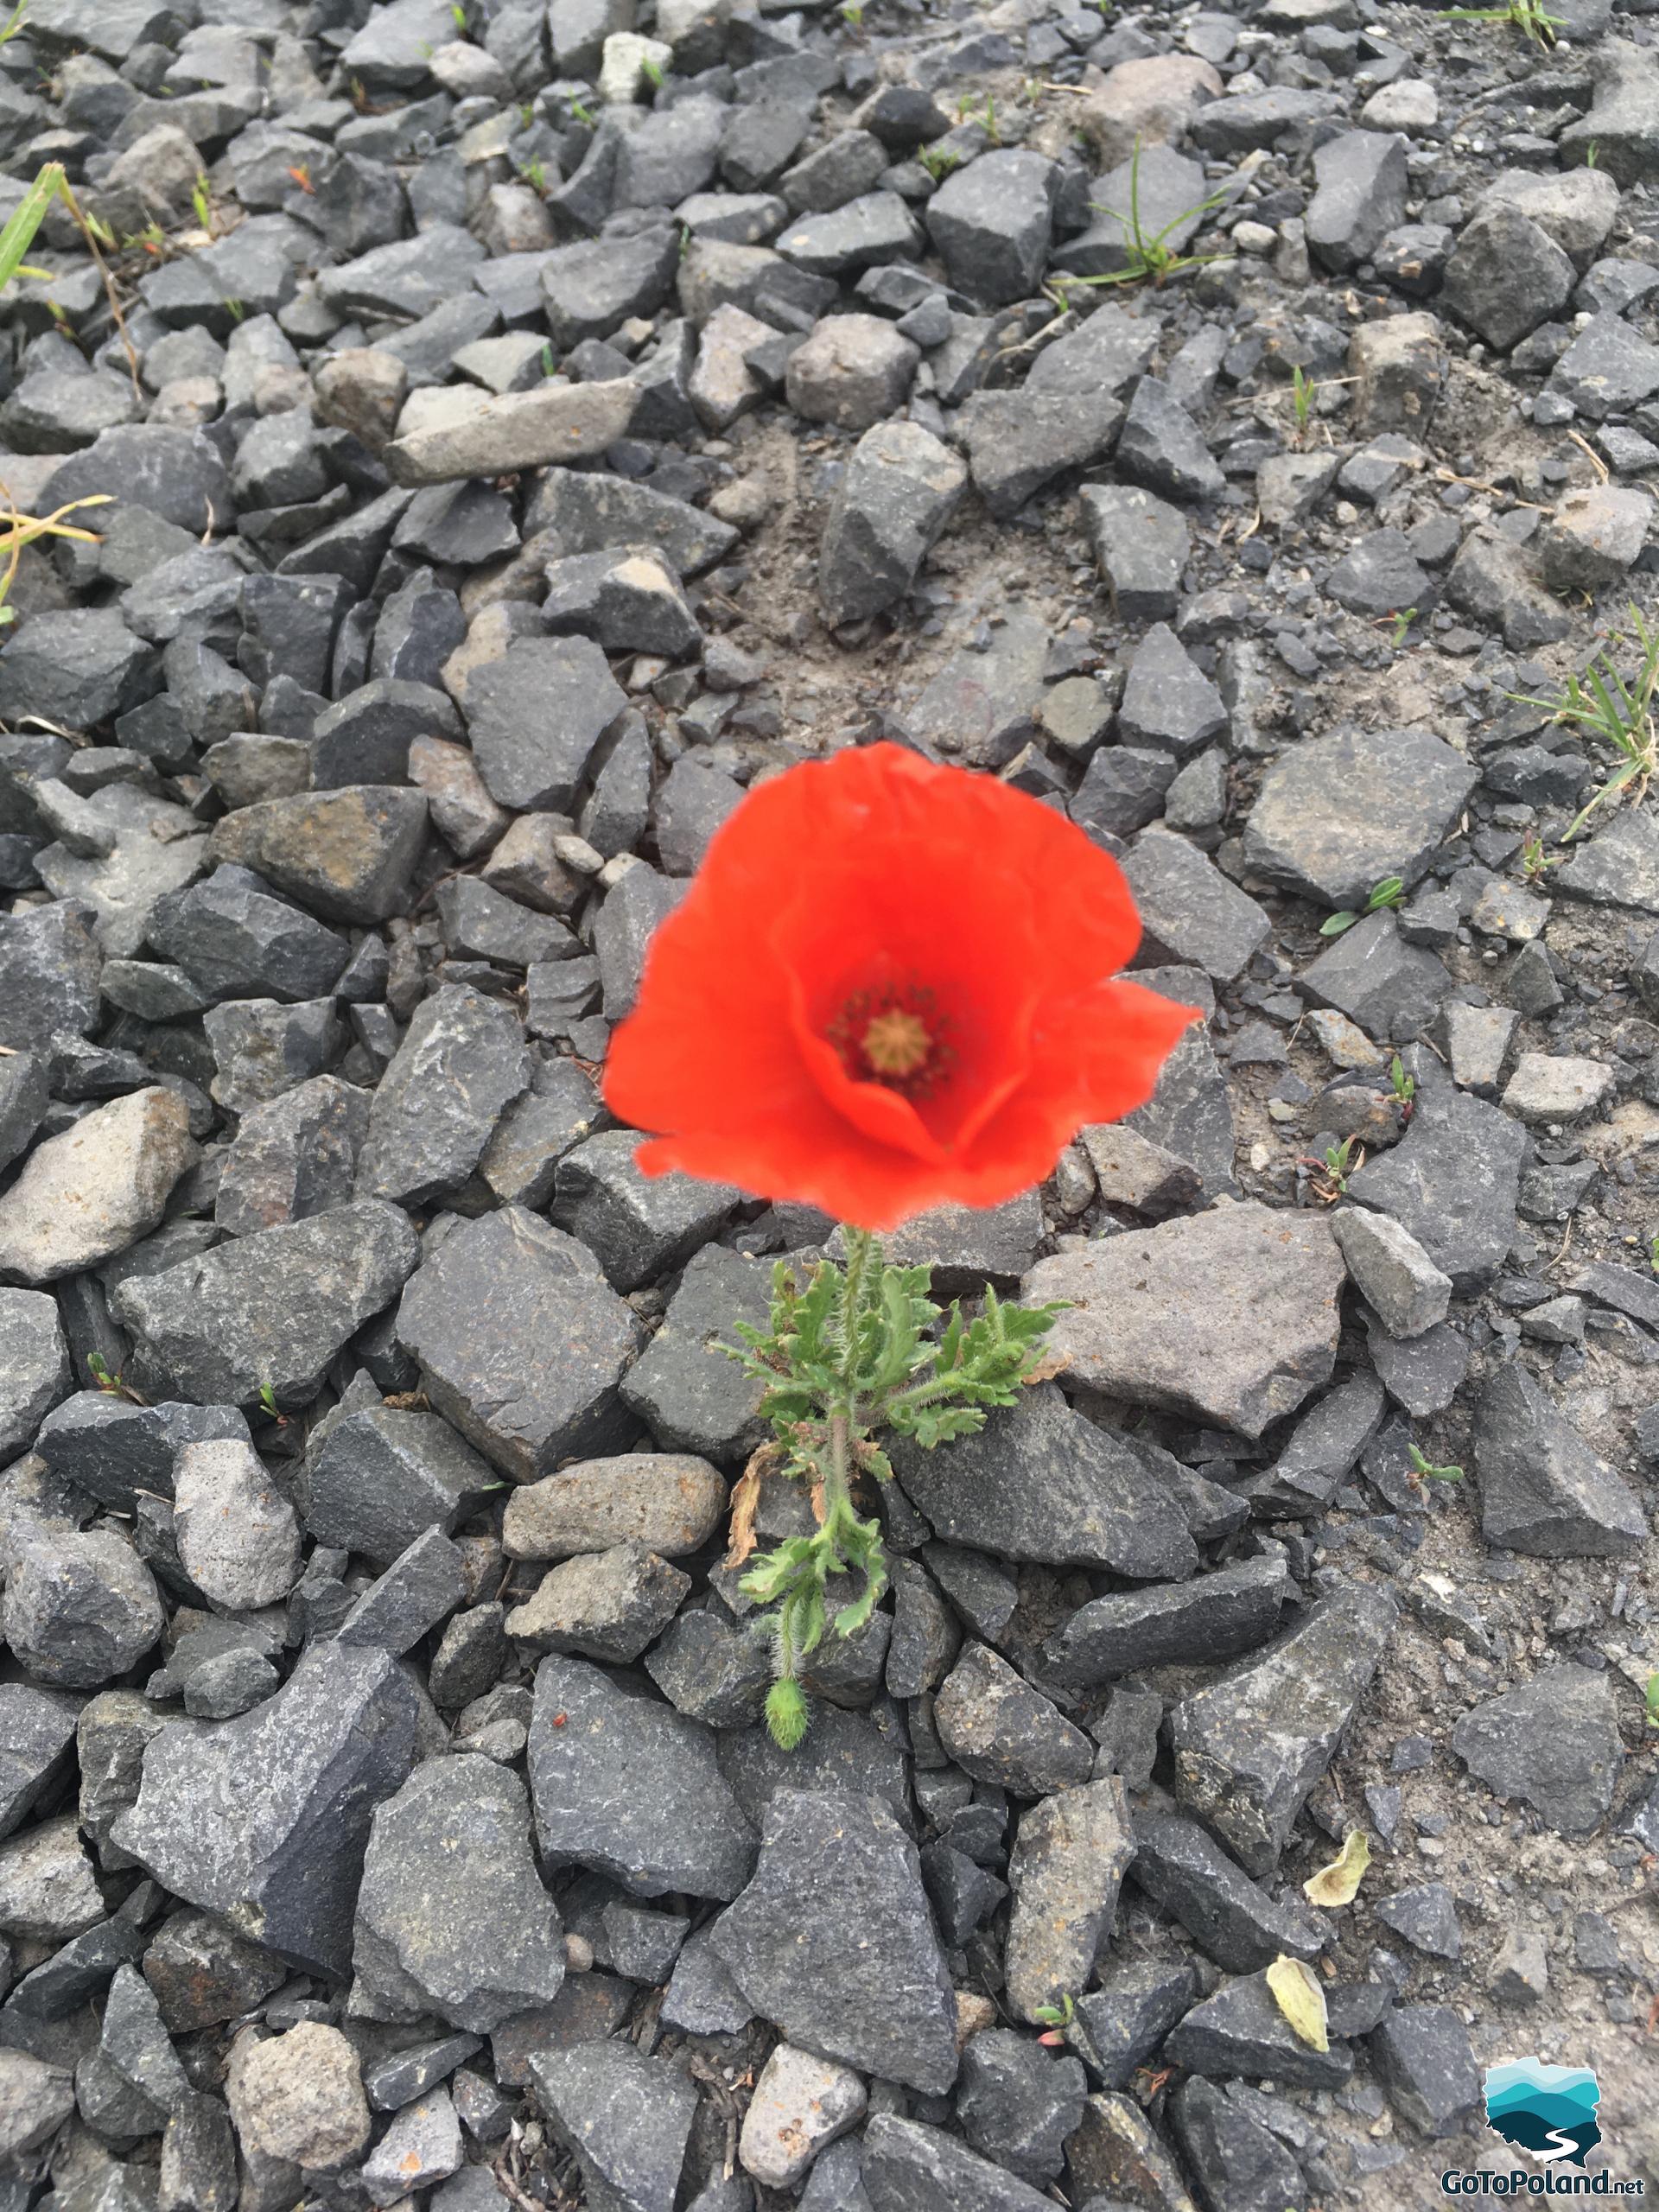 A red poppy growing alone between small, grey rocks